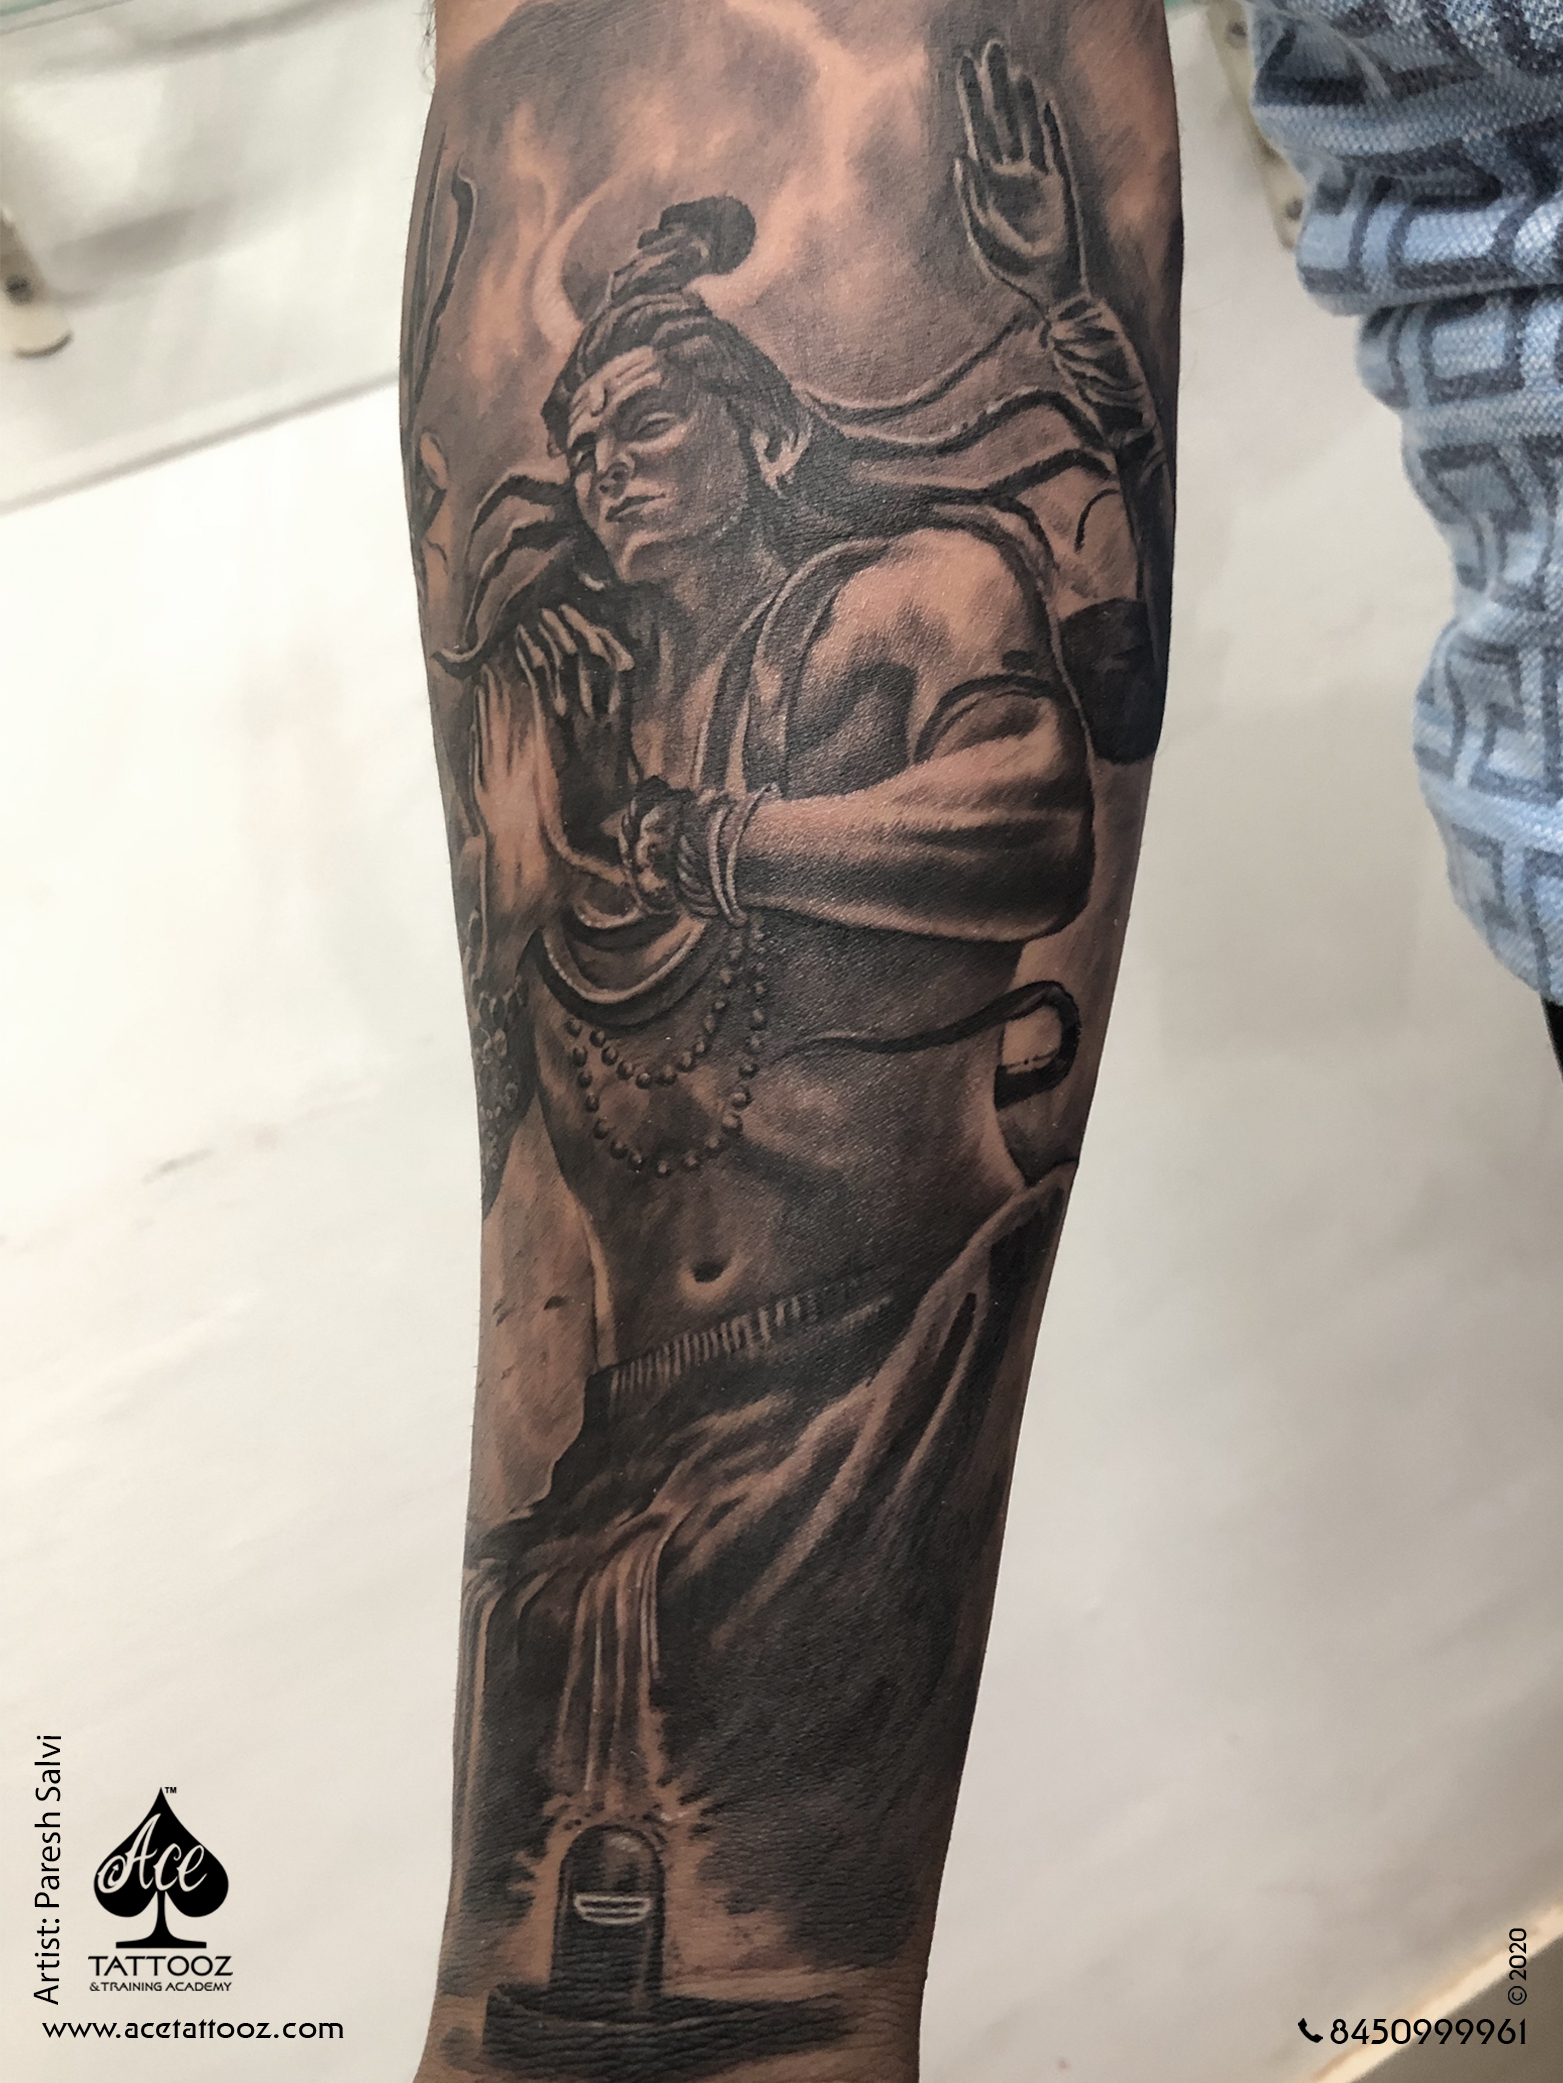 Top 10 Mythological God Tattoos And Their Meanings